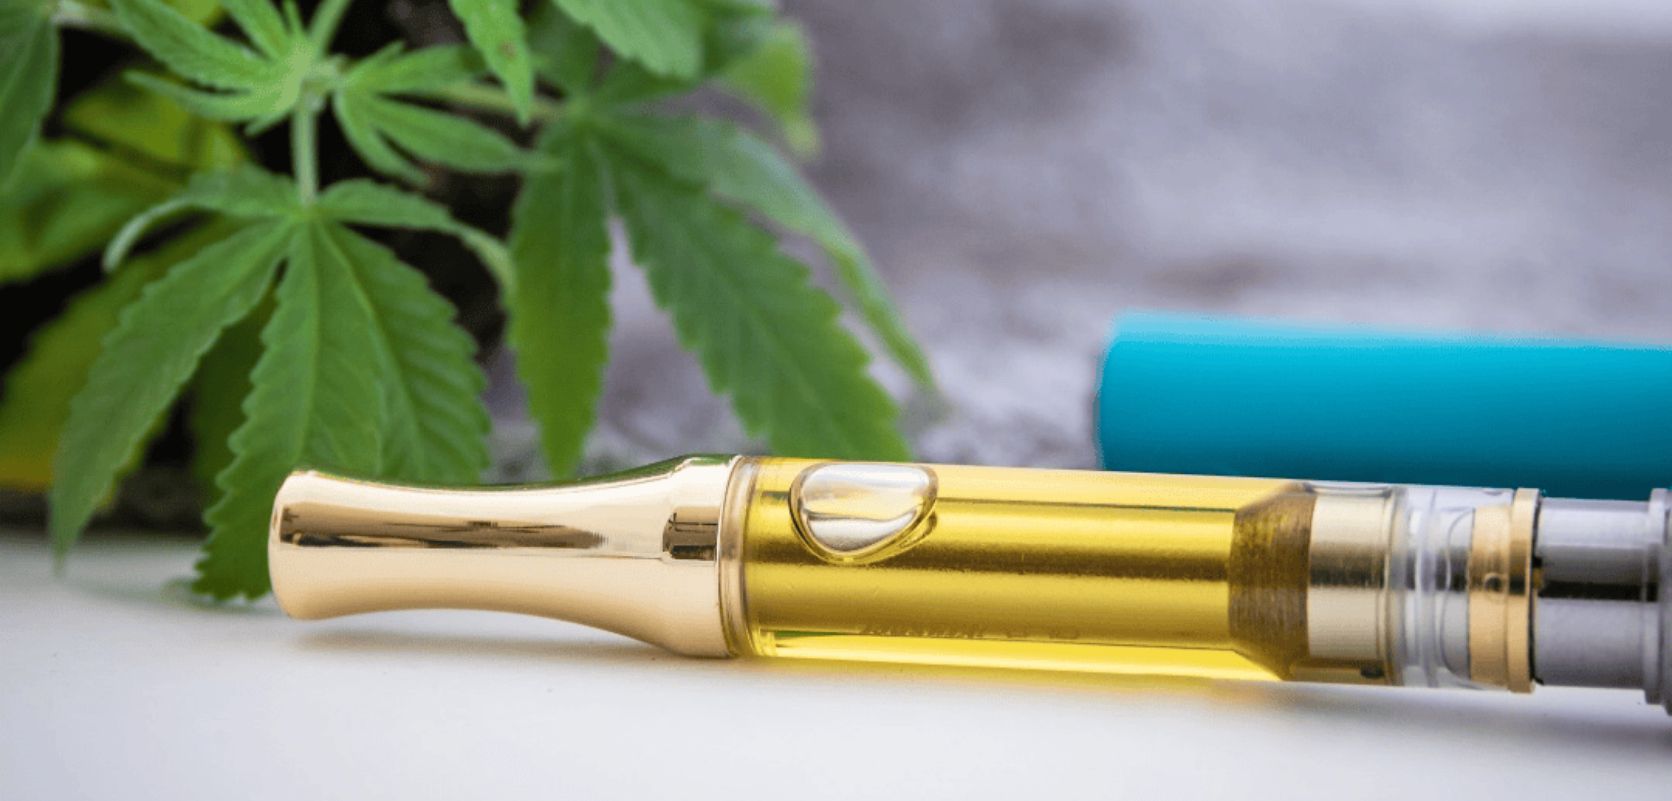 The best cannabis store will put your needs first. You'll receive your CBD vape pen today, tomorrow, or as soon as possible!